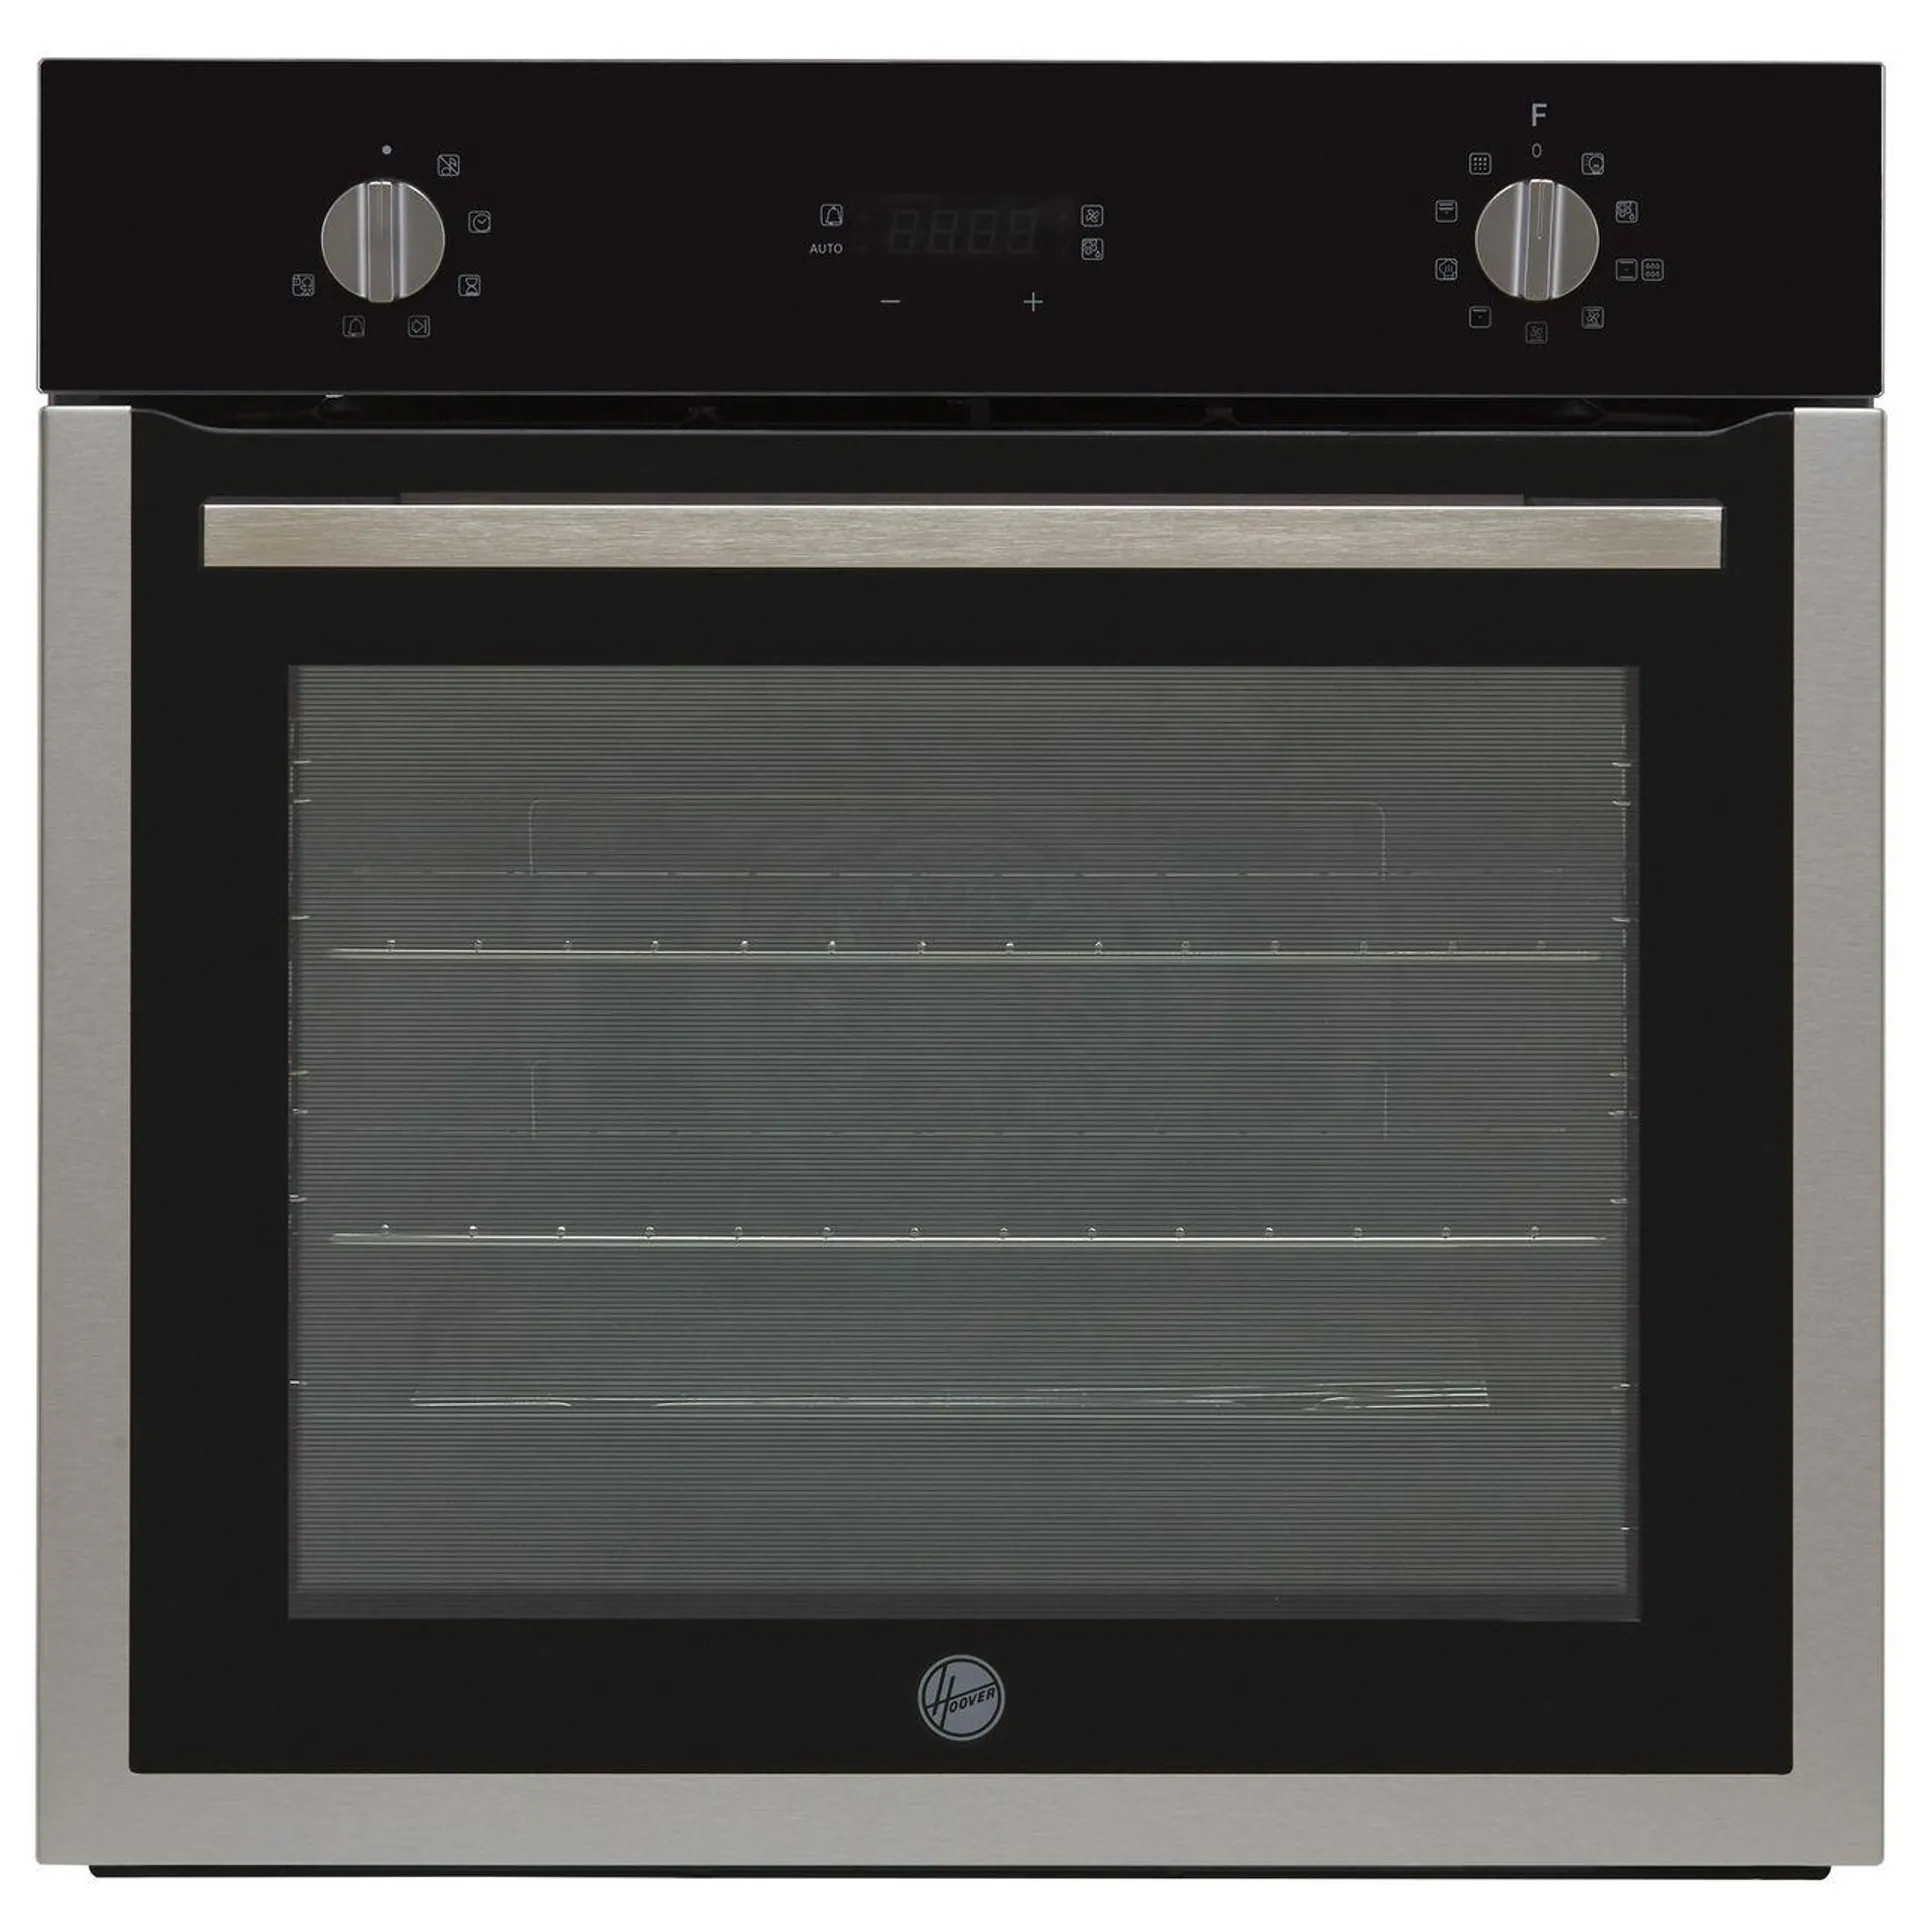 Hoover H-OVEN 300 HOC3UB5858BI Built In Electric Single Oven - Black / Stainless Steel - A Rated